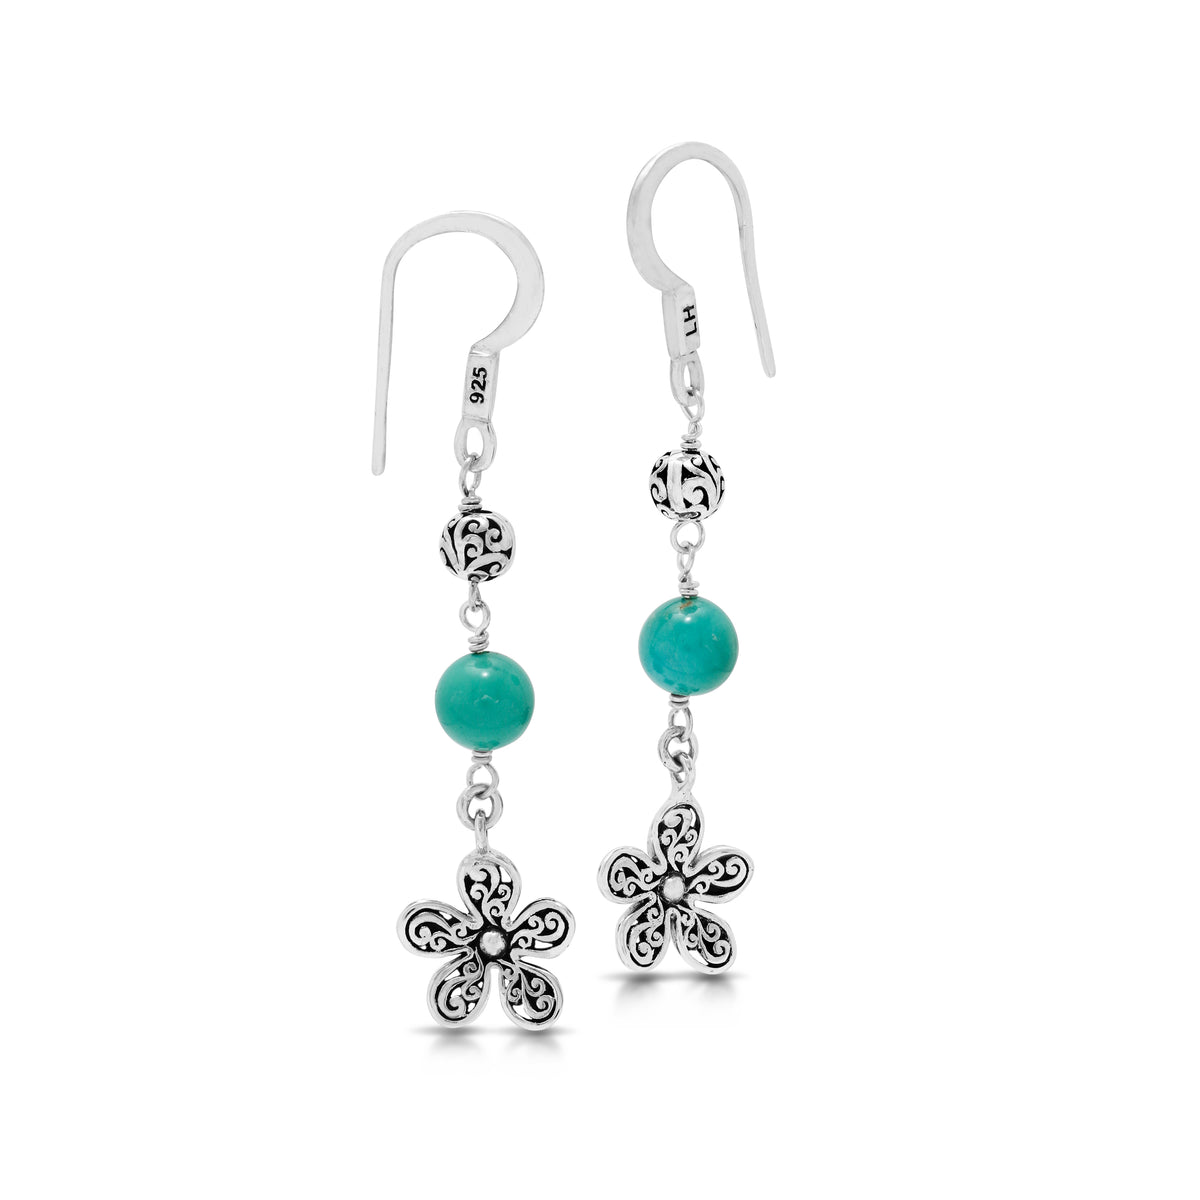 Blue Turquoise Bead with Sterling Silver Scroll Bead and Flower Scroll Drop Fishook Earrings - Lois Hill Jewelry